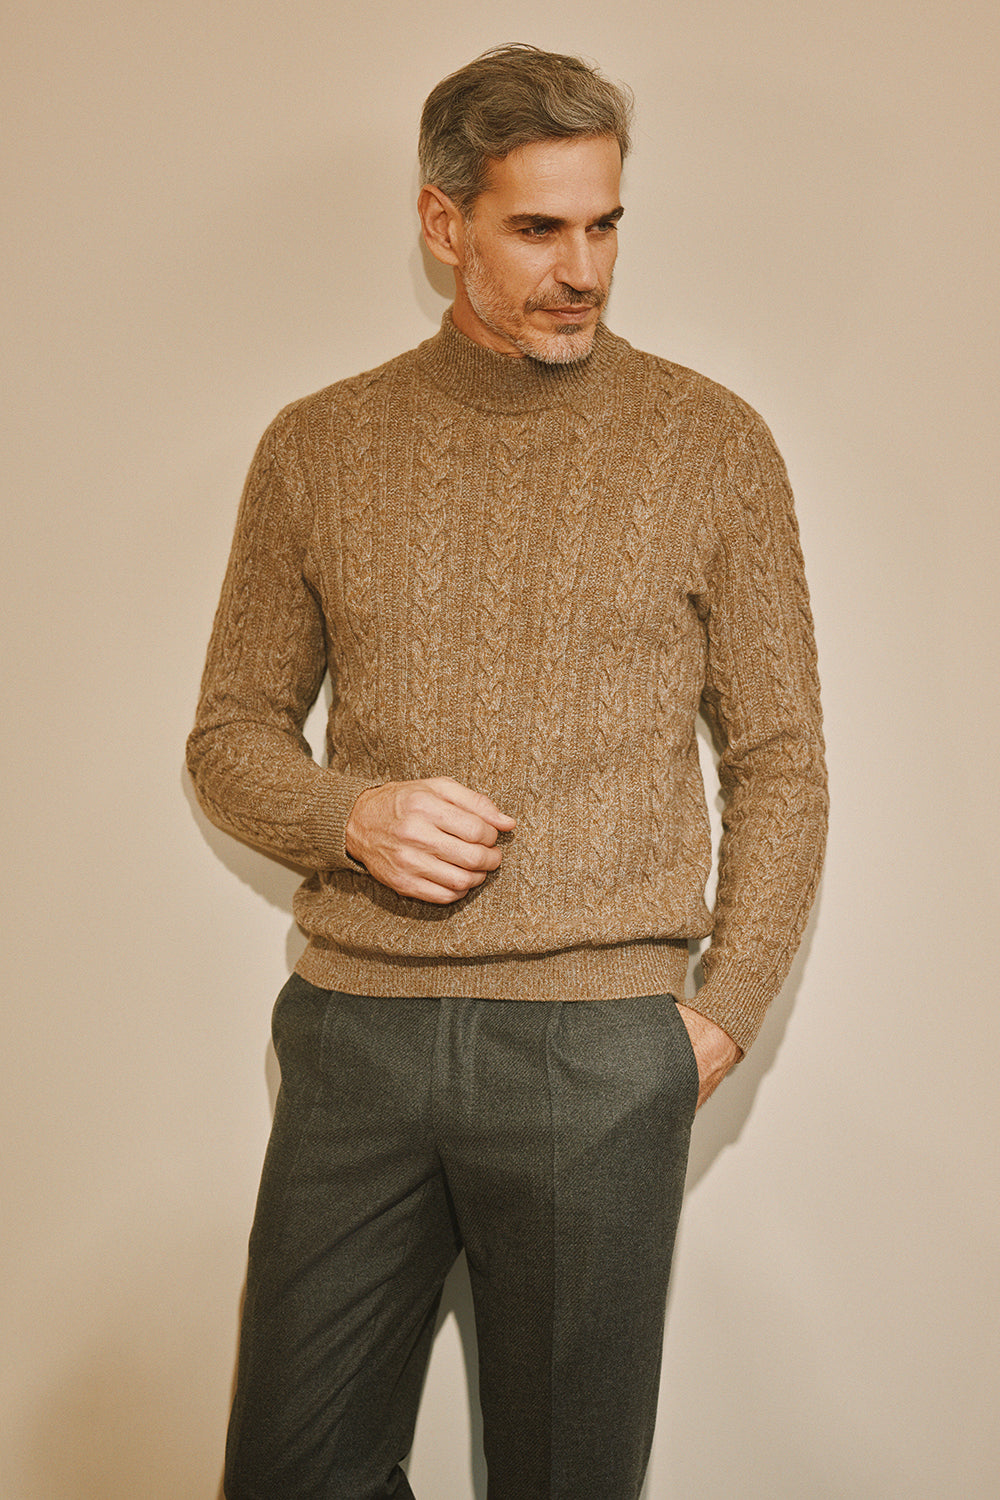 Sauvian knitted Crew Neck in Mouliné Cashmere